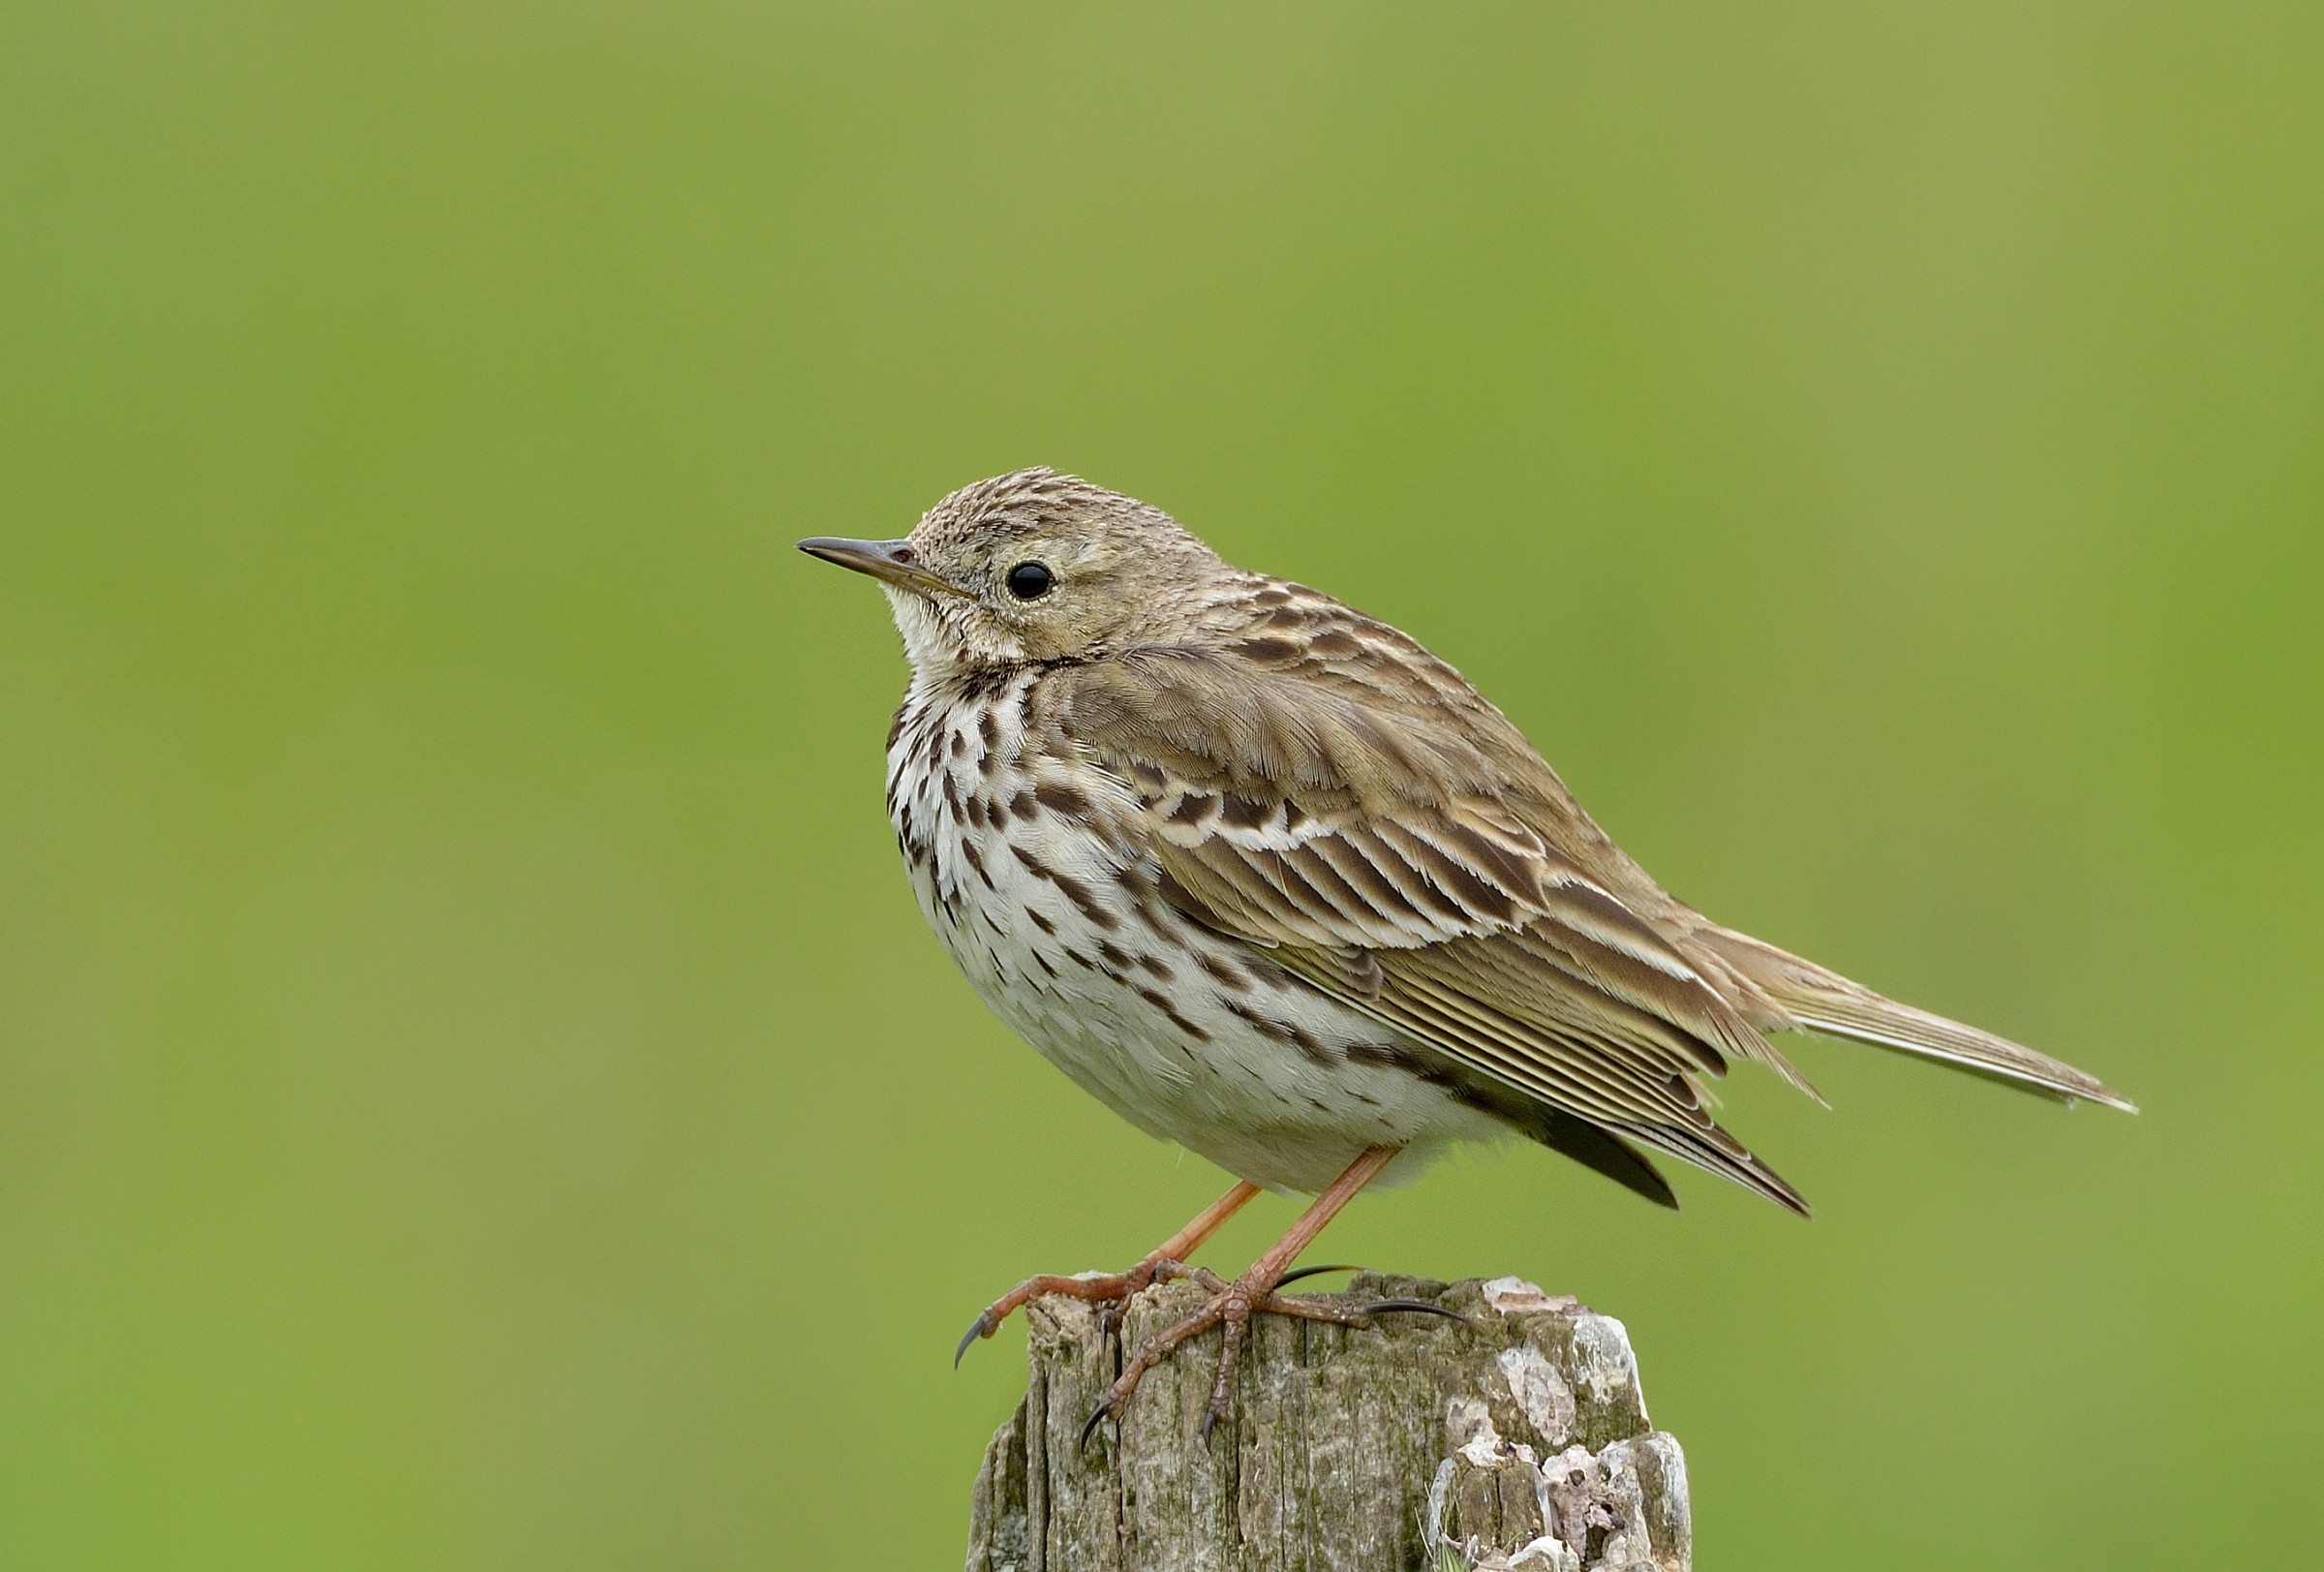 Meadow pipit - I...